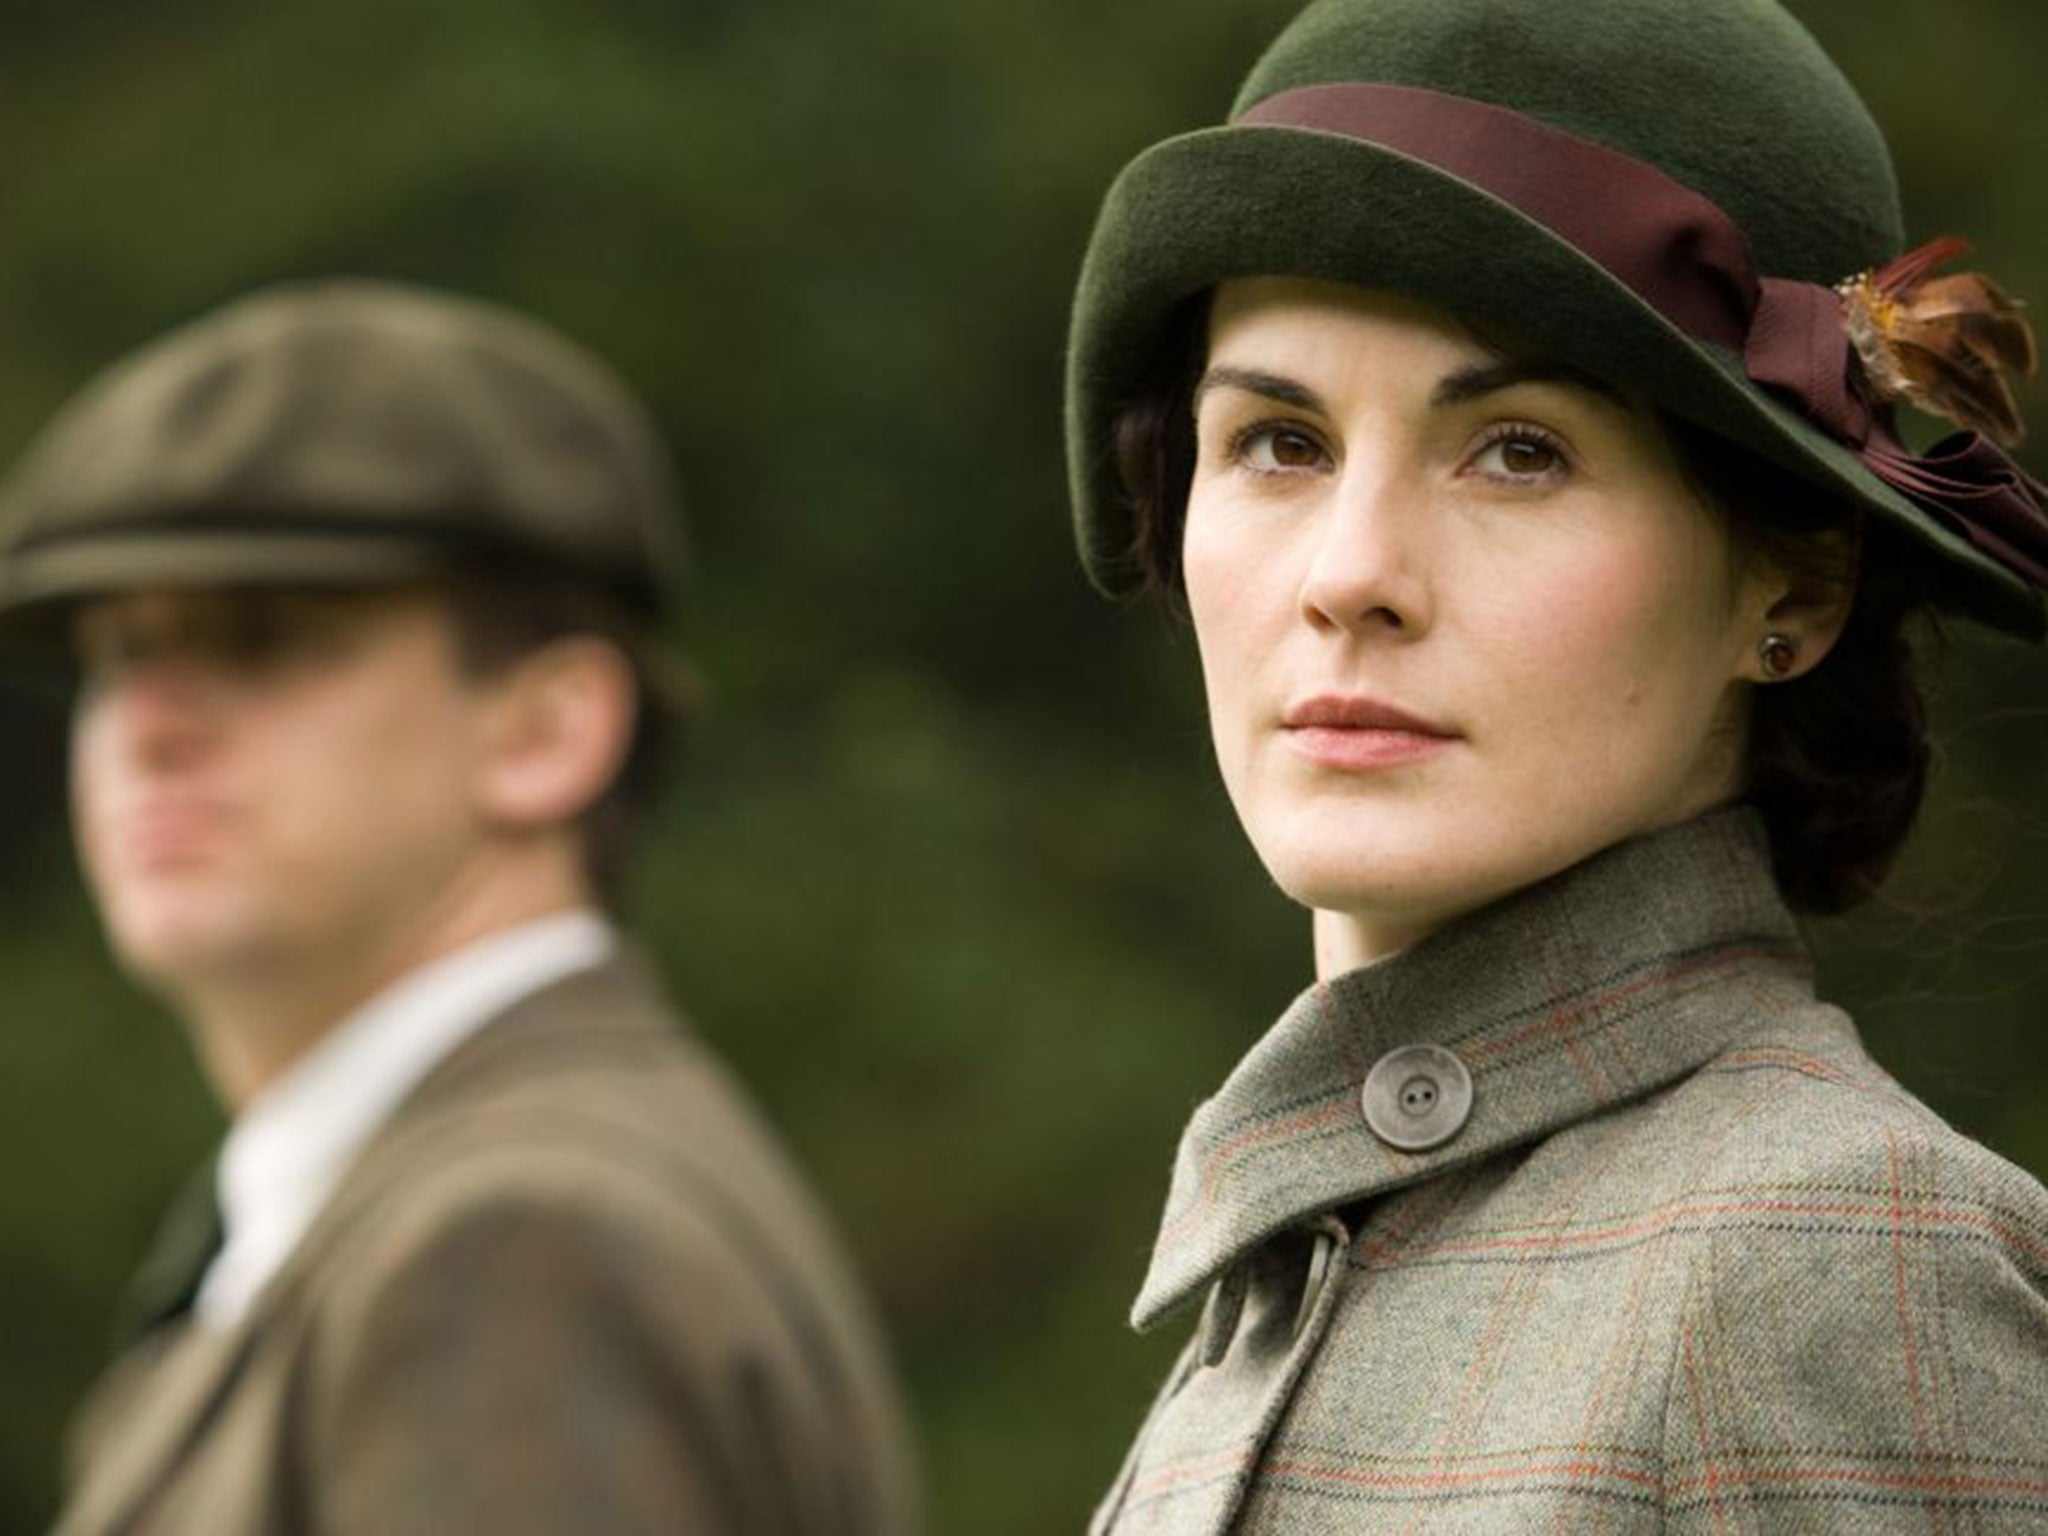 There'll be more of Lady Mary's rivalry with Edith in Downton series five